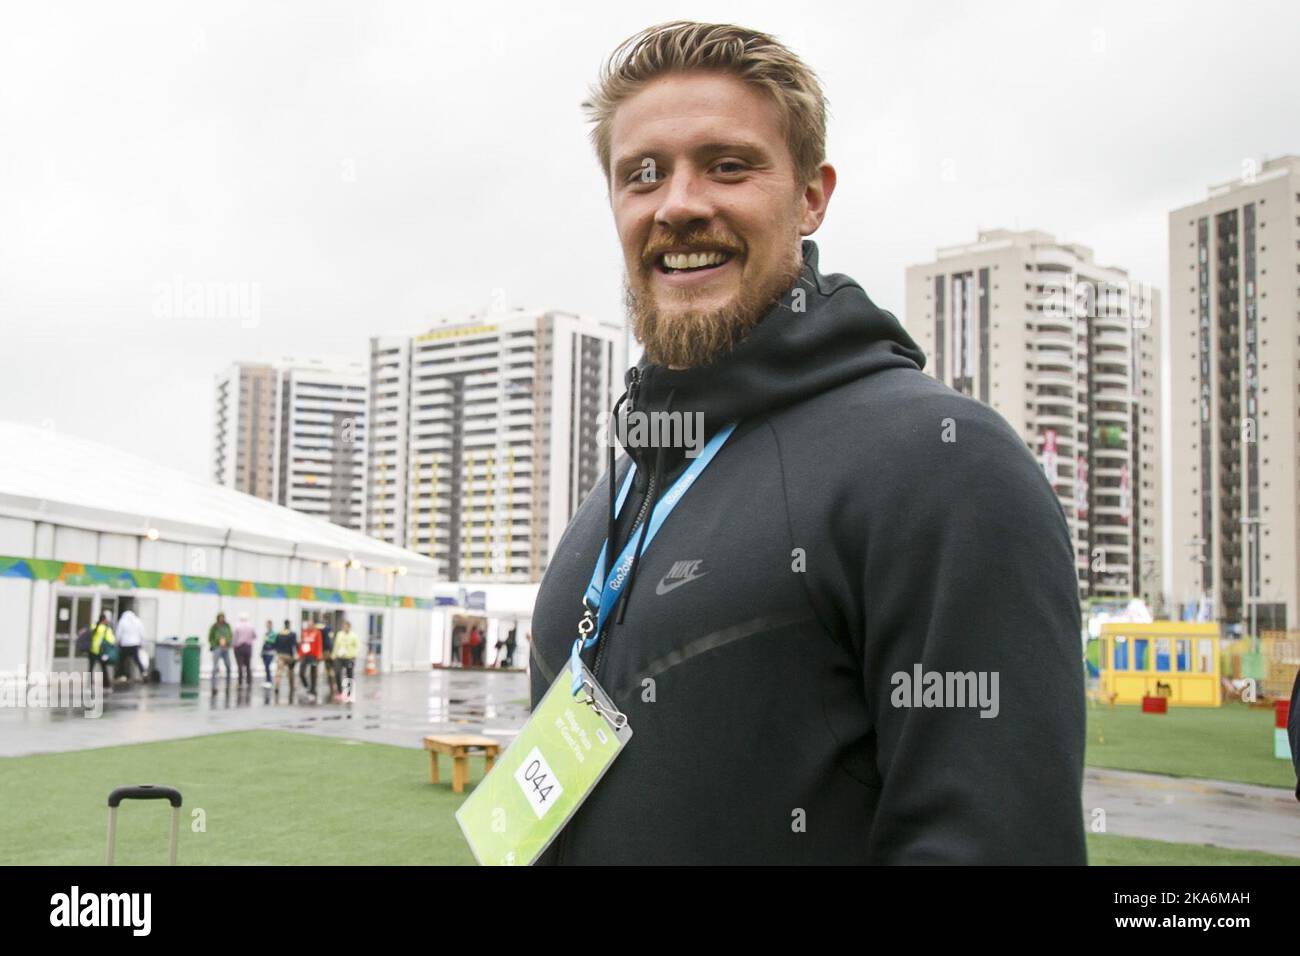 RIO DE JANEIRO, BRAZIL 20160810. Summer Olympics in Rio in 2016. TV2 expert in athletics Andreas Thorkildsen in the Olympic village during the press gathering in Rio de Janeiro on Wednesday. Photo: Heiko Junge / NTB scanpix Stock Photo